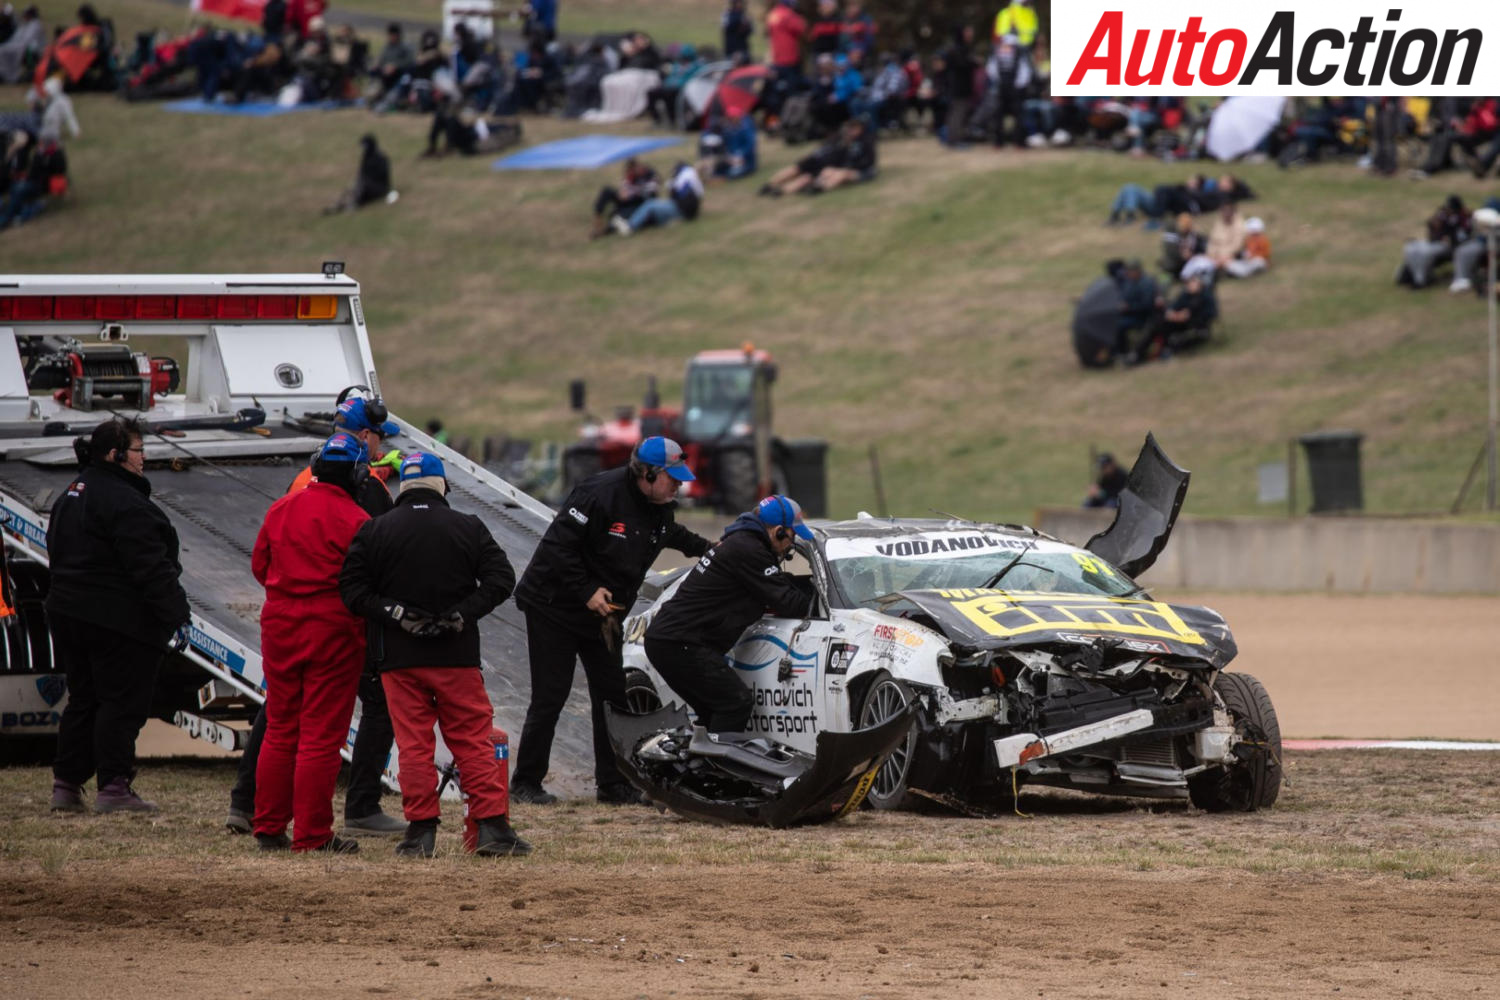 Peter Vodanovich's wreck after a spectacular rollover at the Chase - Photo: InSyde Media